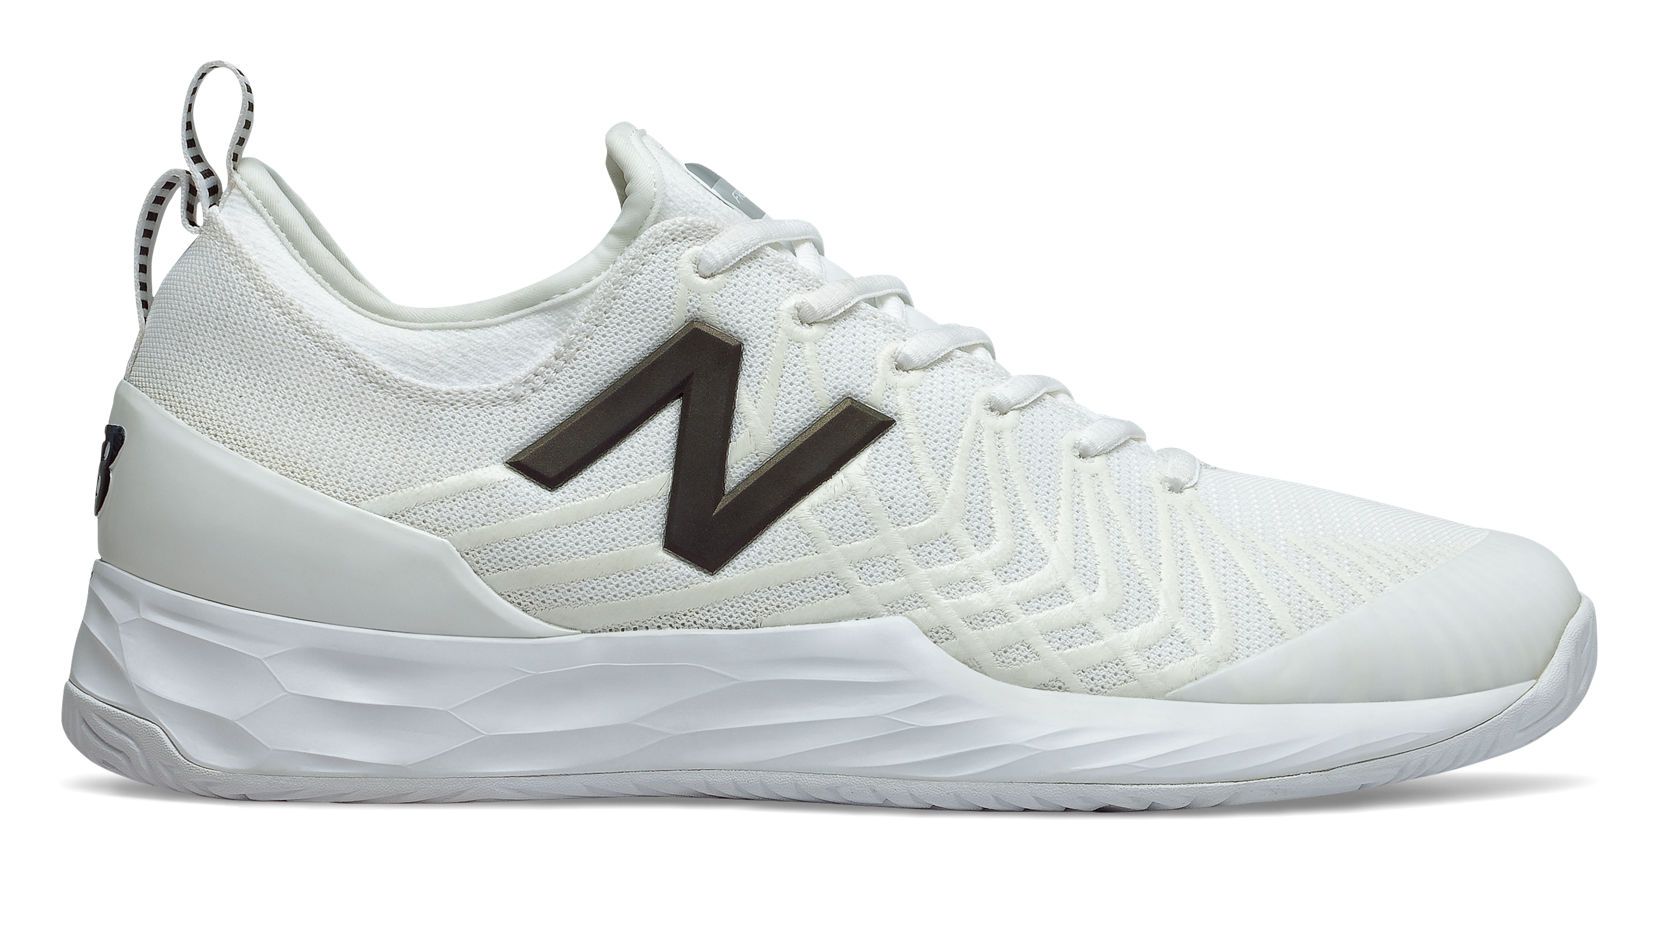 CHAUSSURES HOMME NEW BALANCE MCHLAVWI BLANC